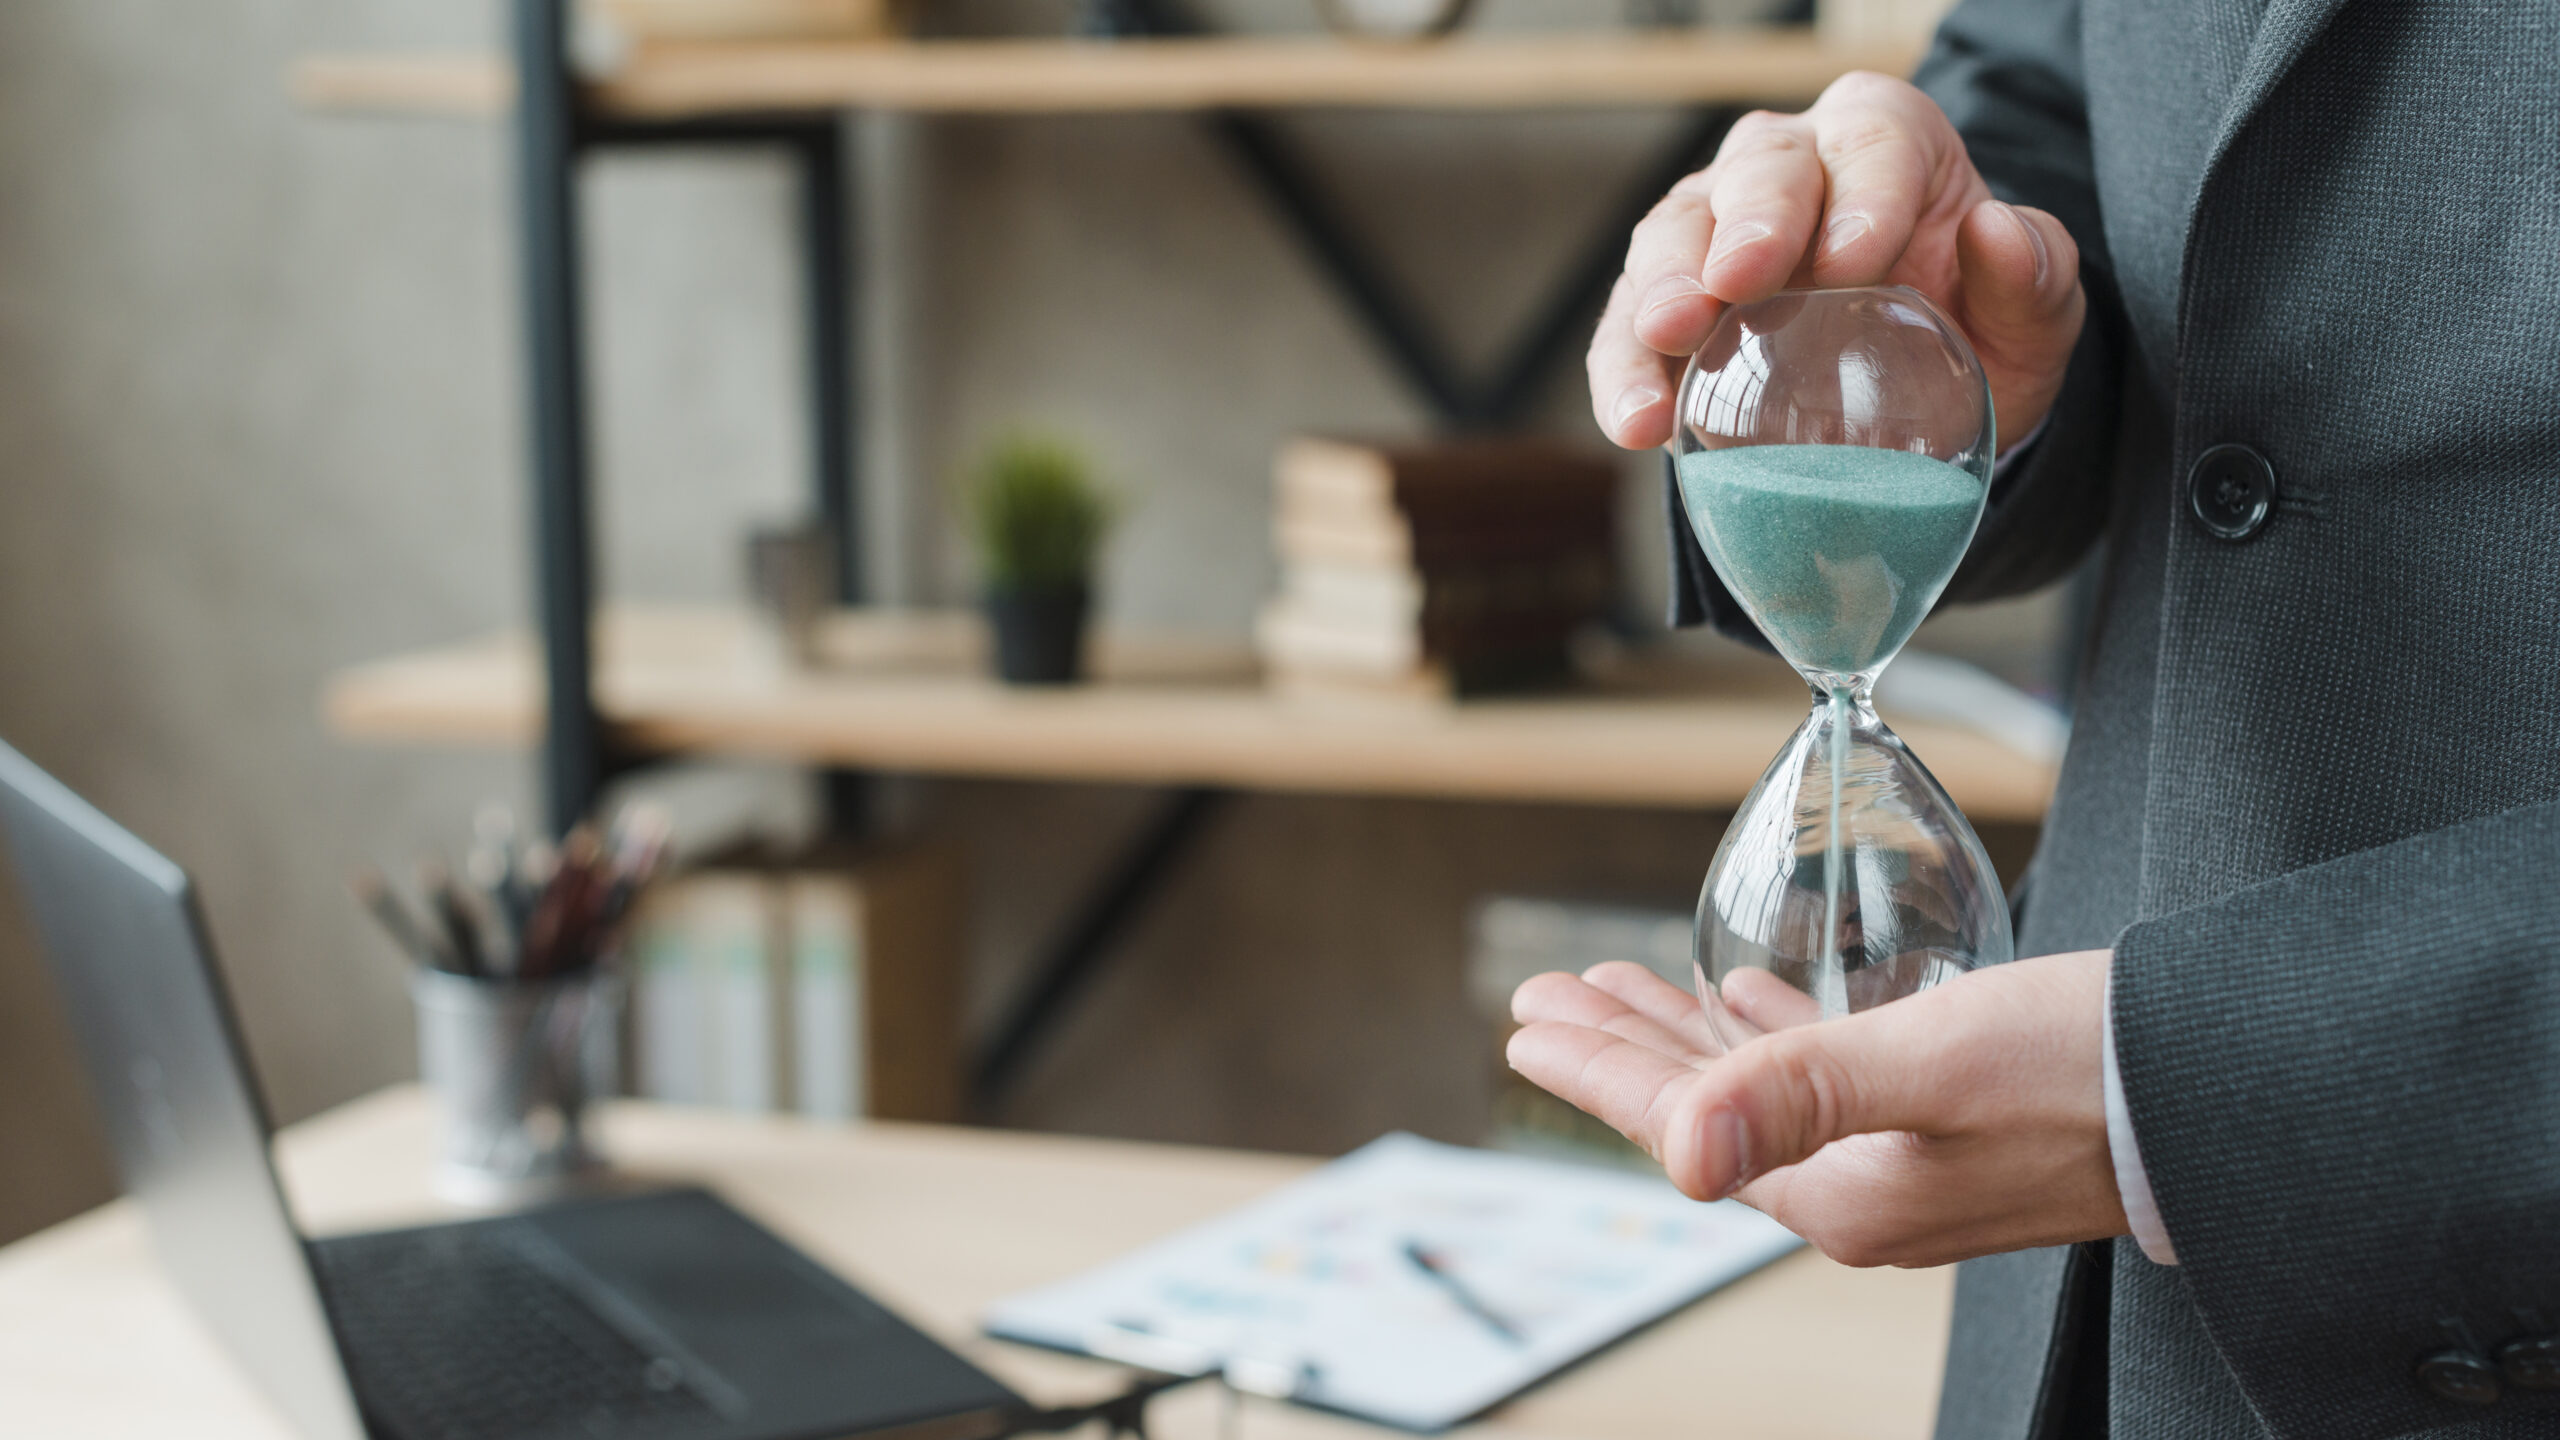 5 Time Management Strategies To Double Your Productivity